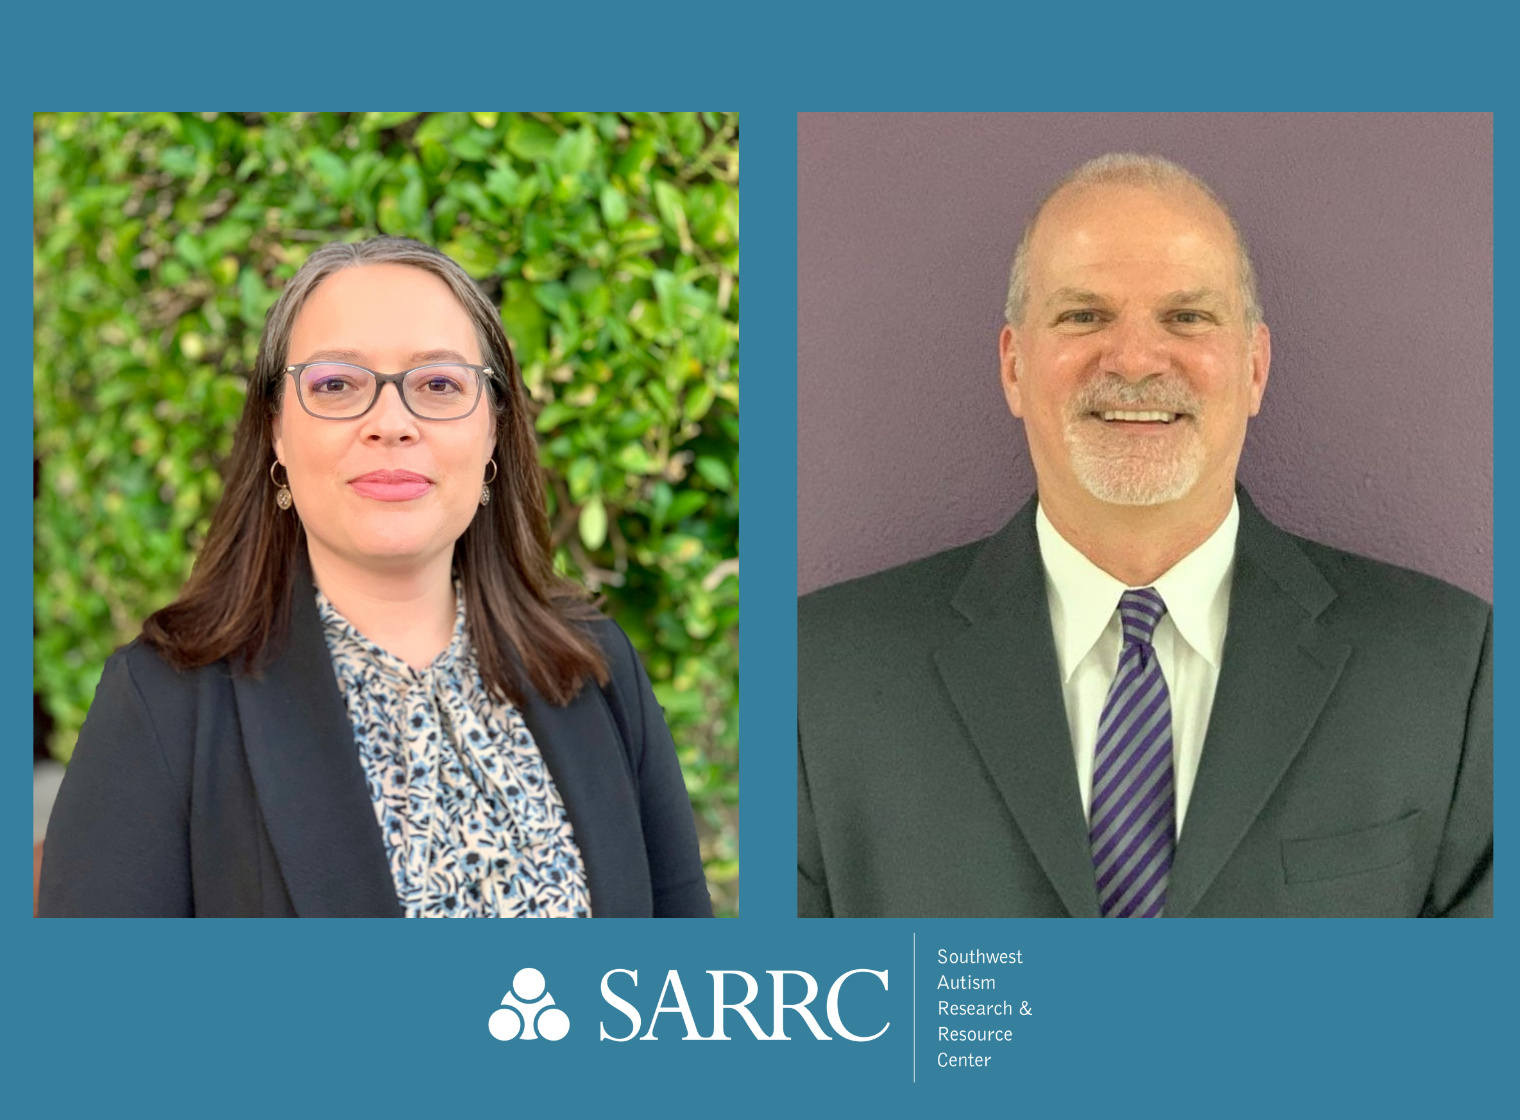 SARRC Announces Leadership Transitions in 2 Prominent Roles